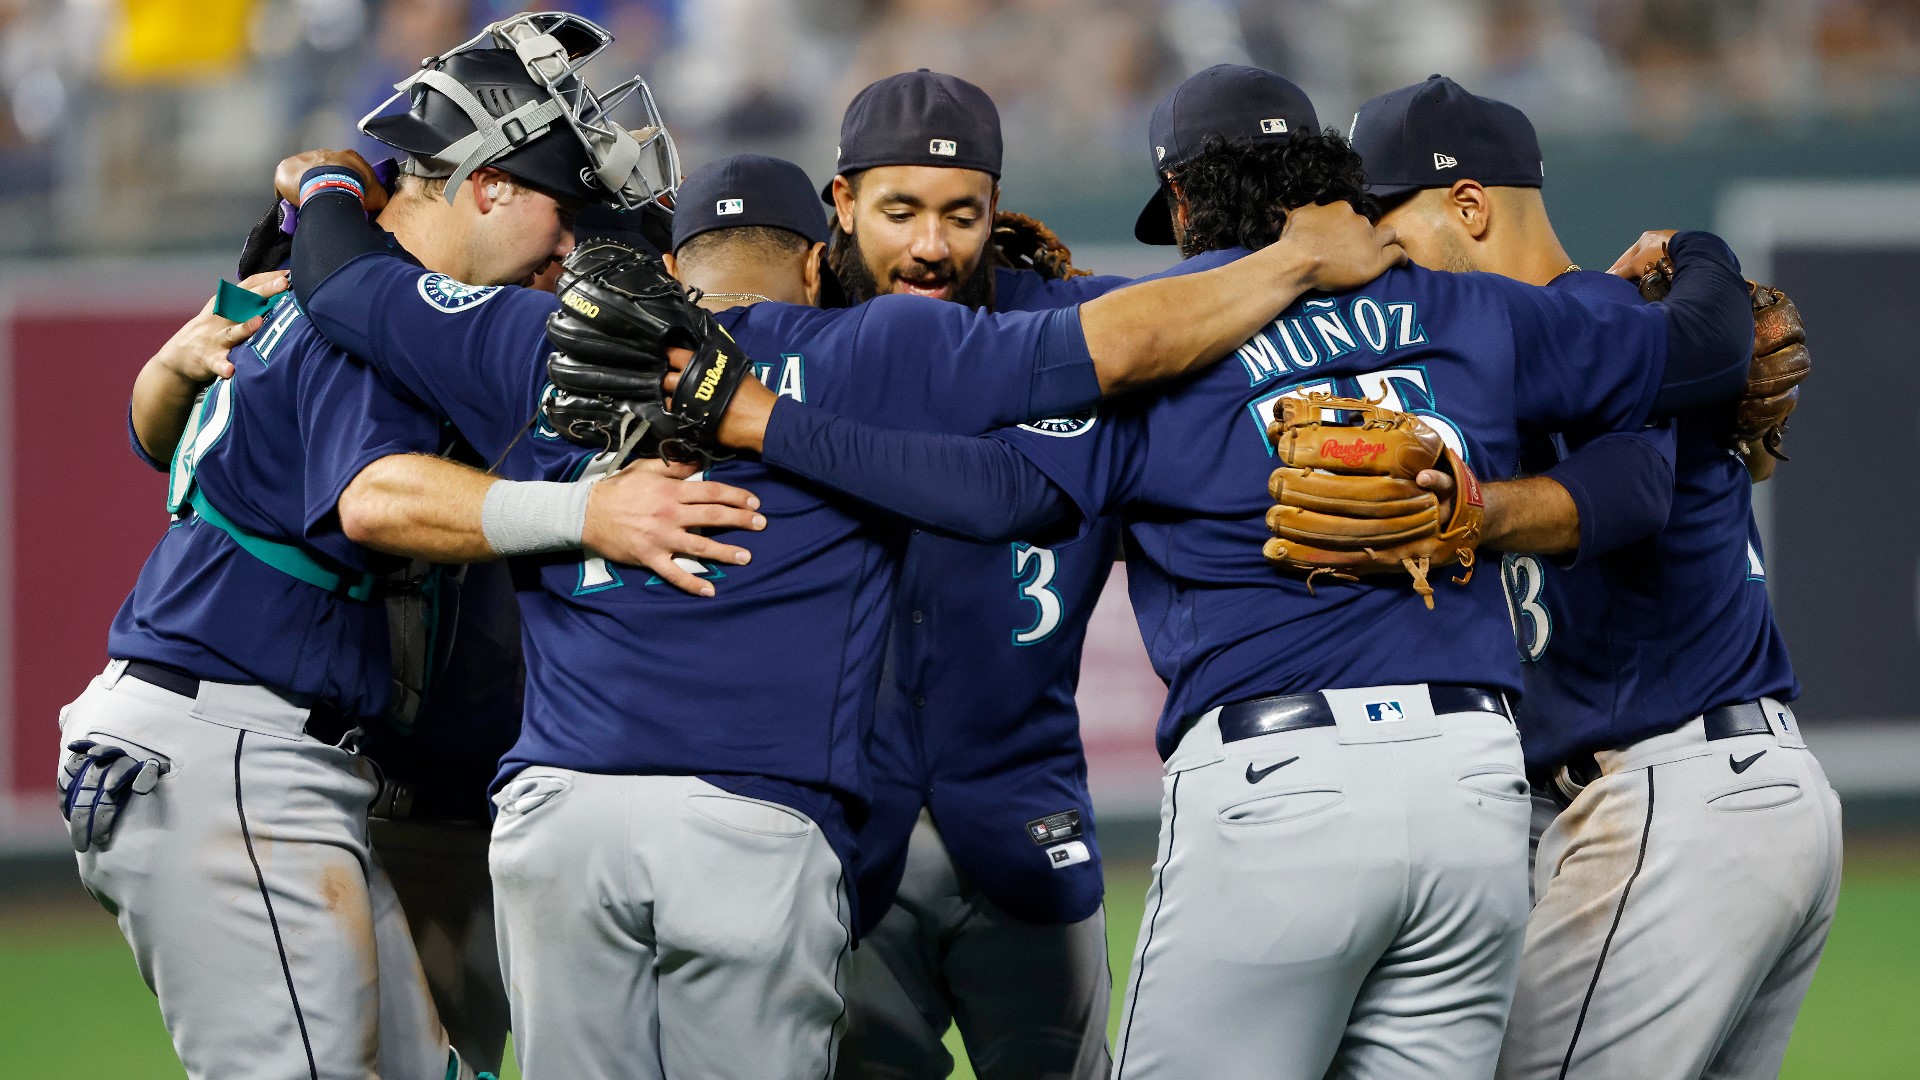 Despite a recent skid, the Mariners are on the verge of clinching their first playoff spot in two decades.